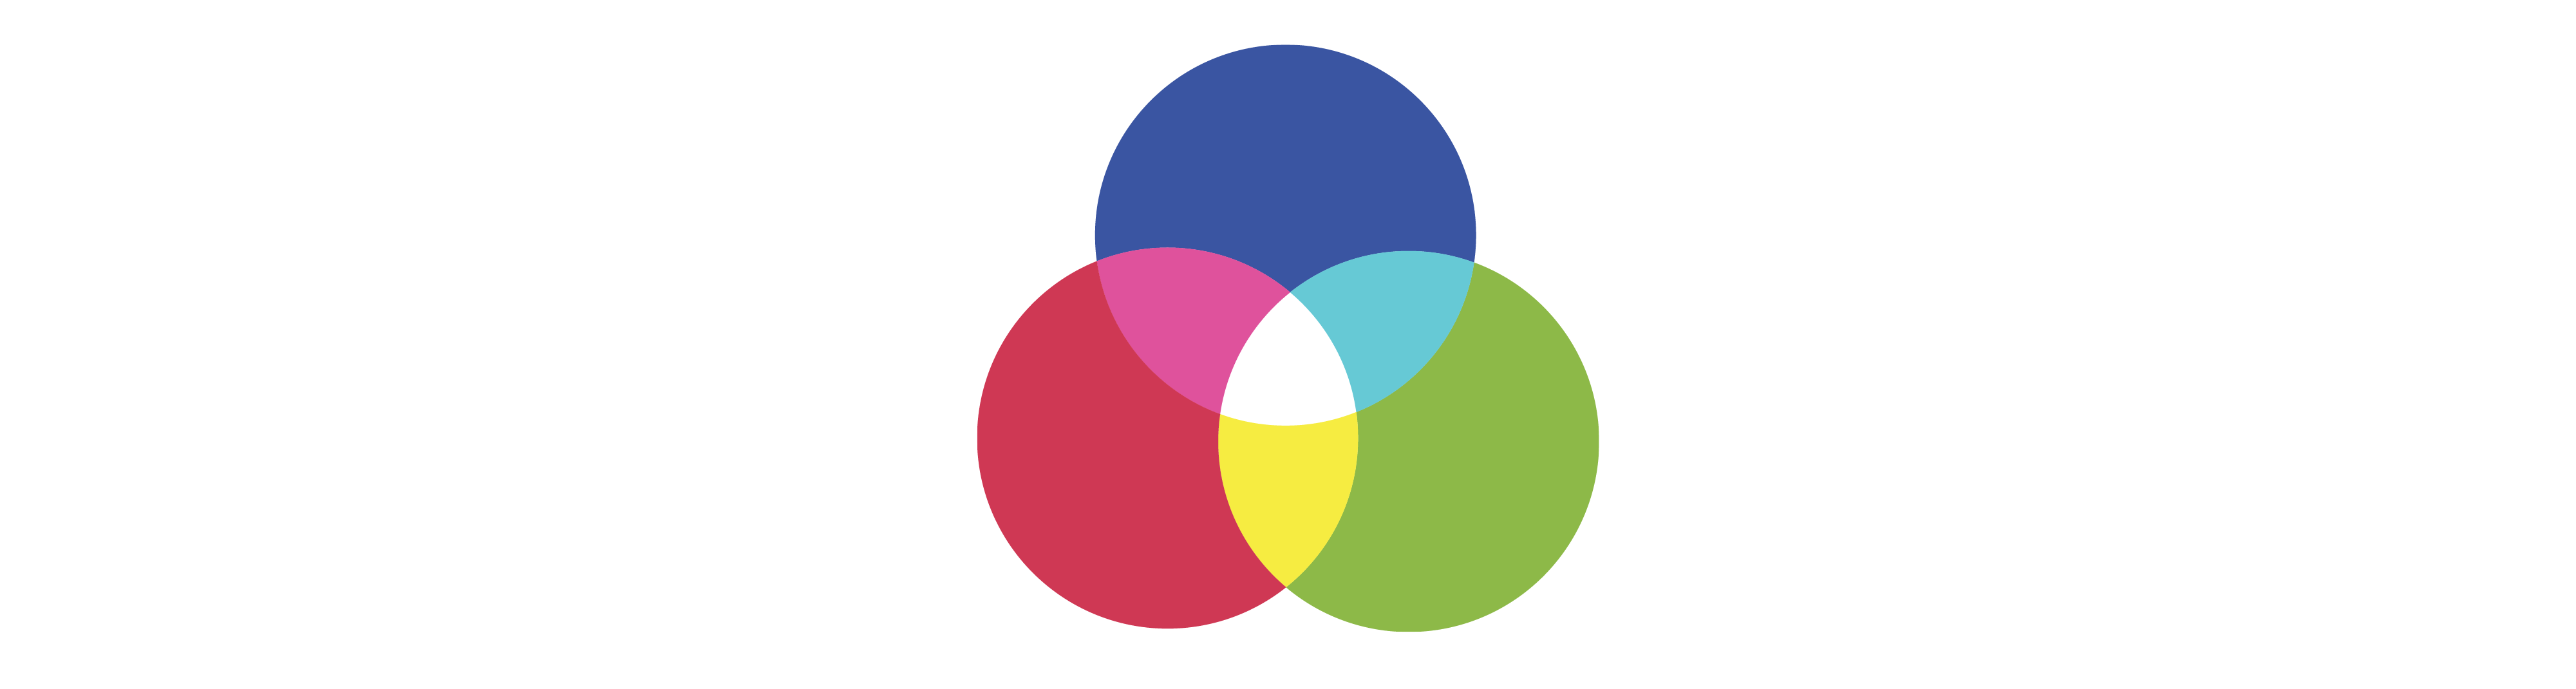 3 coloured circles that overlap– 1 is red, 1 is green and 1 is blue. where the red and green overlap there is a small area of yellow, where the blue and green overlap there is a small area of cyan, and where the red and blue overlap there is a small area of magenta. In the centre all colours overlap creating an area of white.